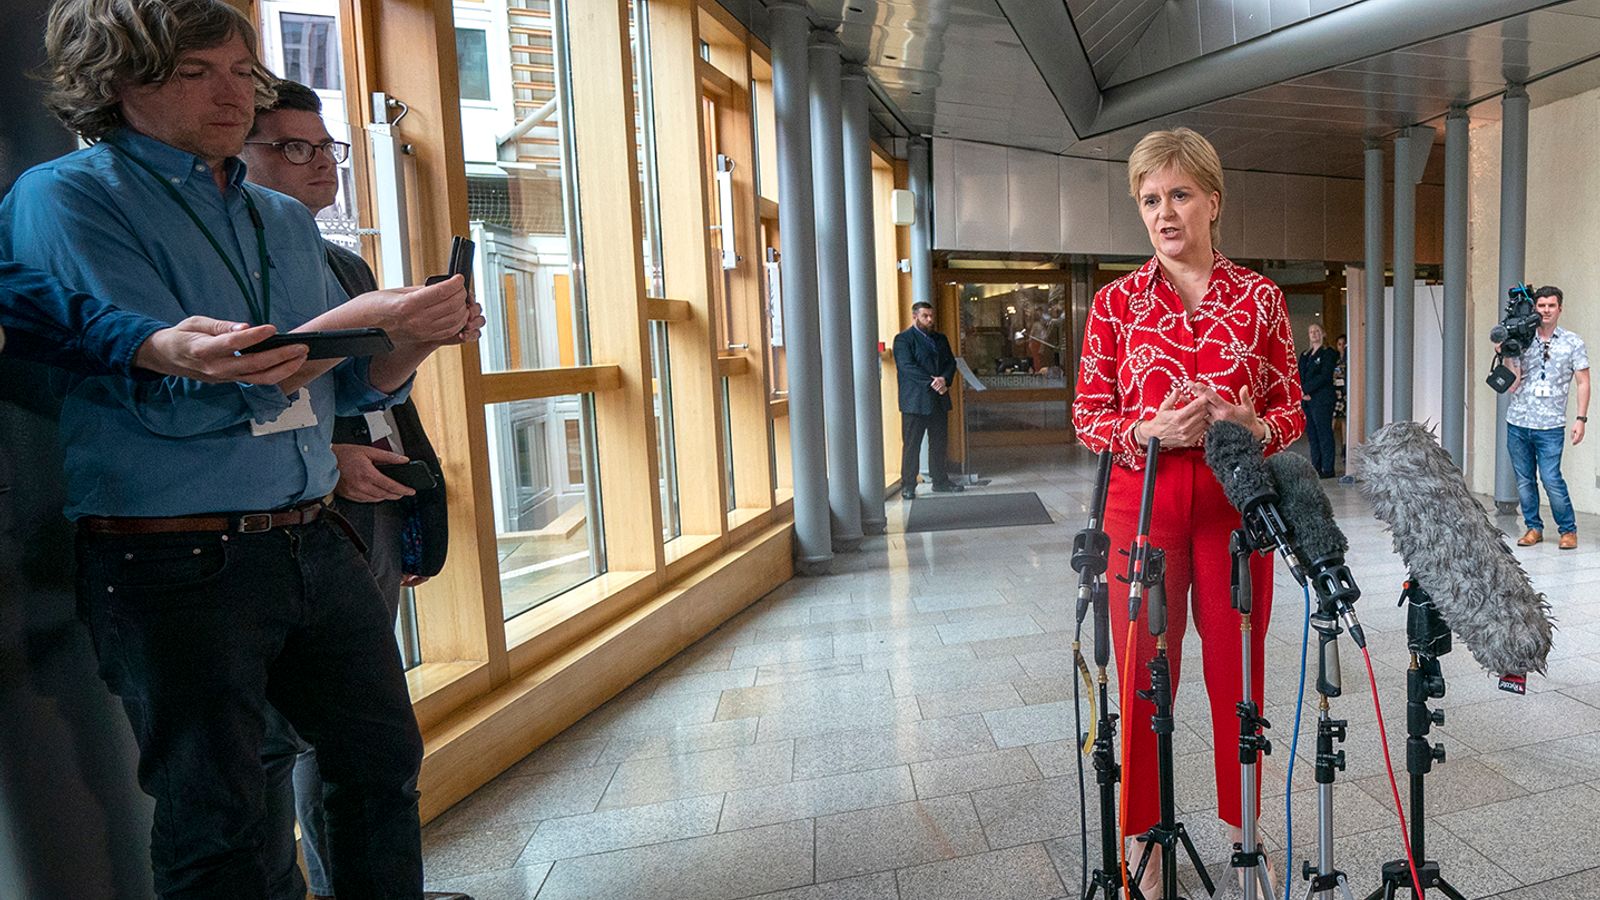 Nicola Sturgeon remains defiant as she returns to Holyrood after arrest